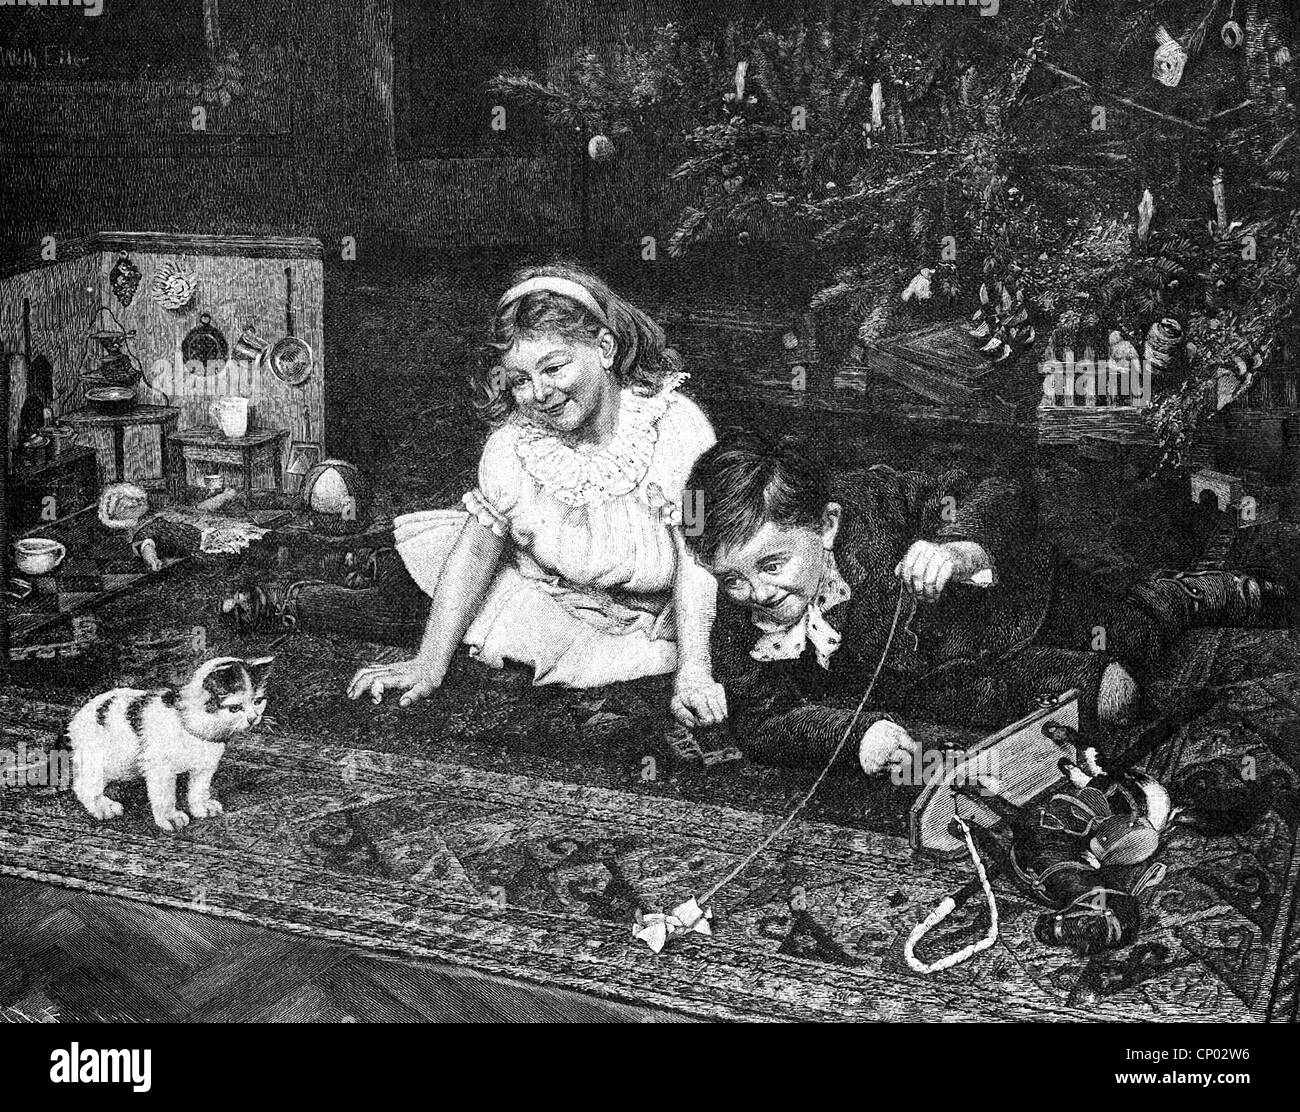 Christmas, a nice mess, children playing with kitten, 'Christmas Kitten' after painting by Wilhelm Eilers (1857 - 1919), wood engraving, 19th century, Additional-Rights-Clearences-Not Available Stock Photo